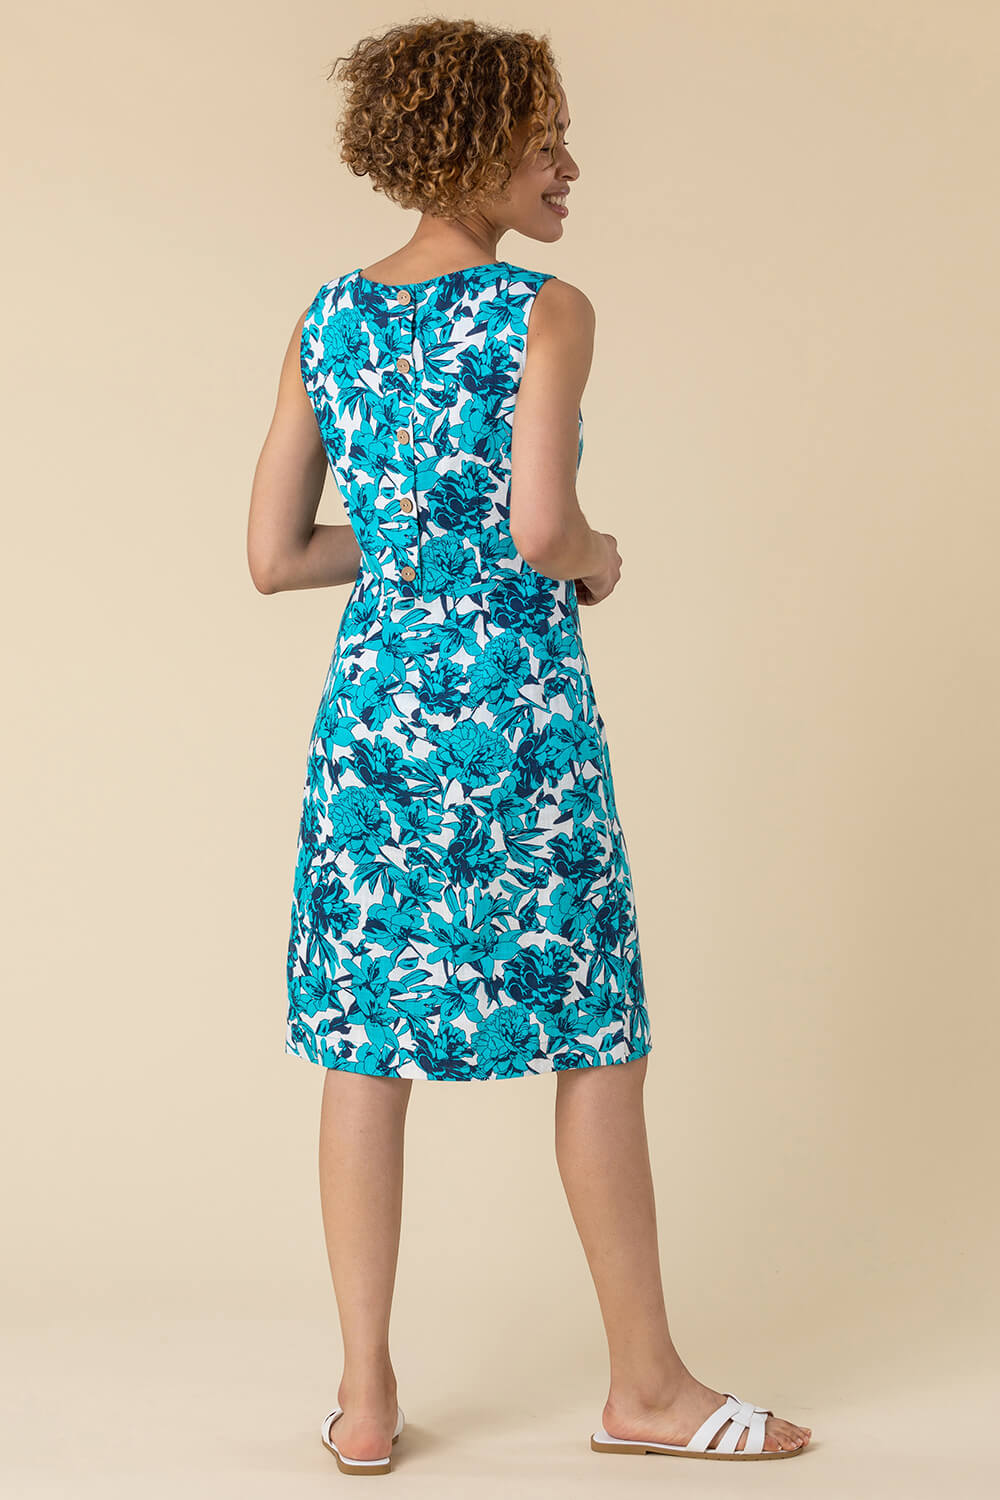 Turquoise Back Button Floral Print Dress, Image 2 of 5